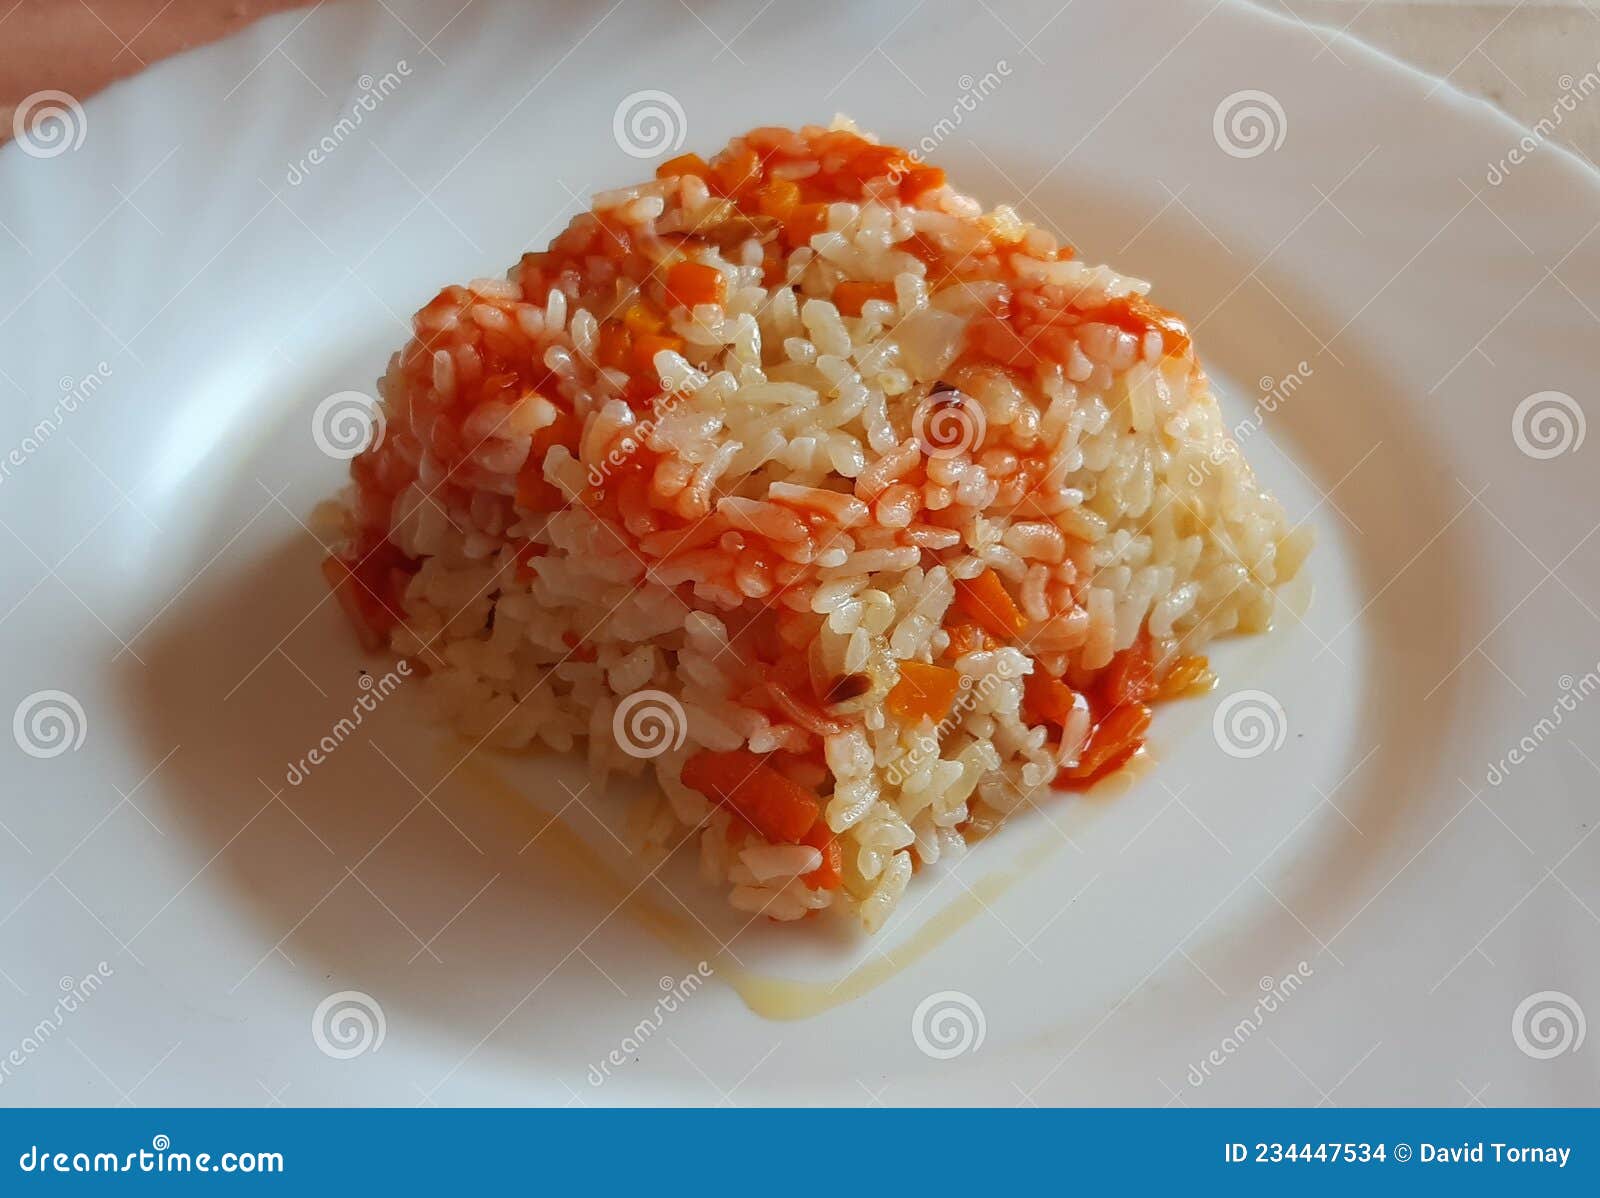 cooked rice with a little tomato sauce